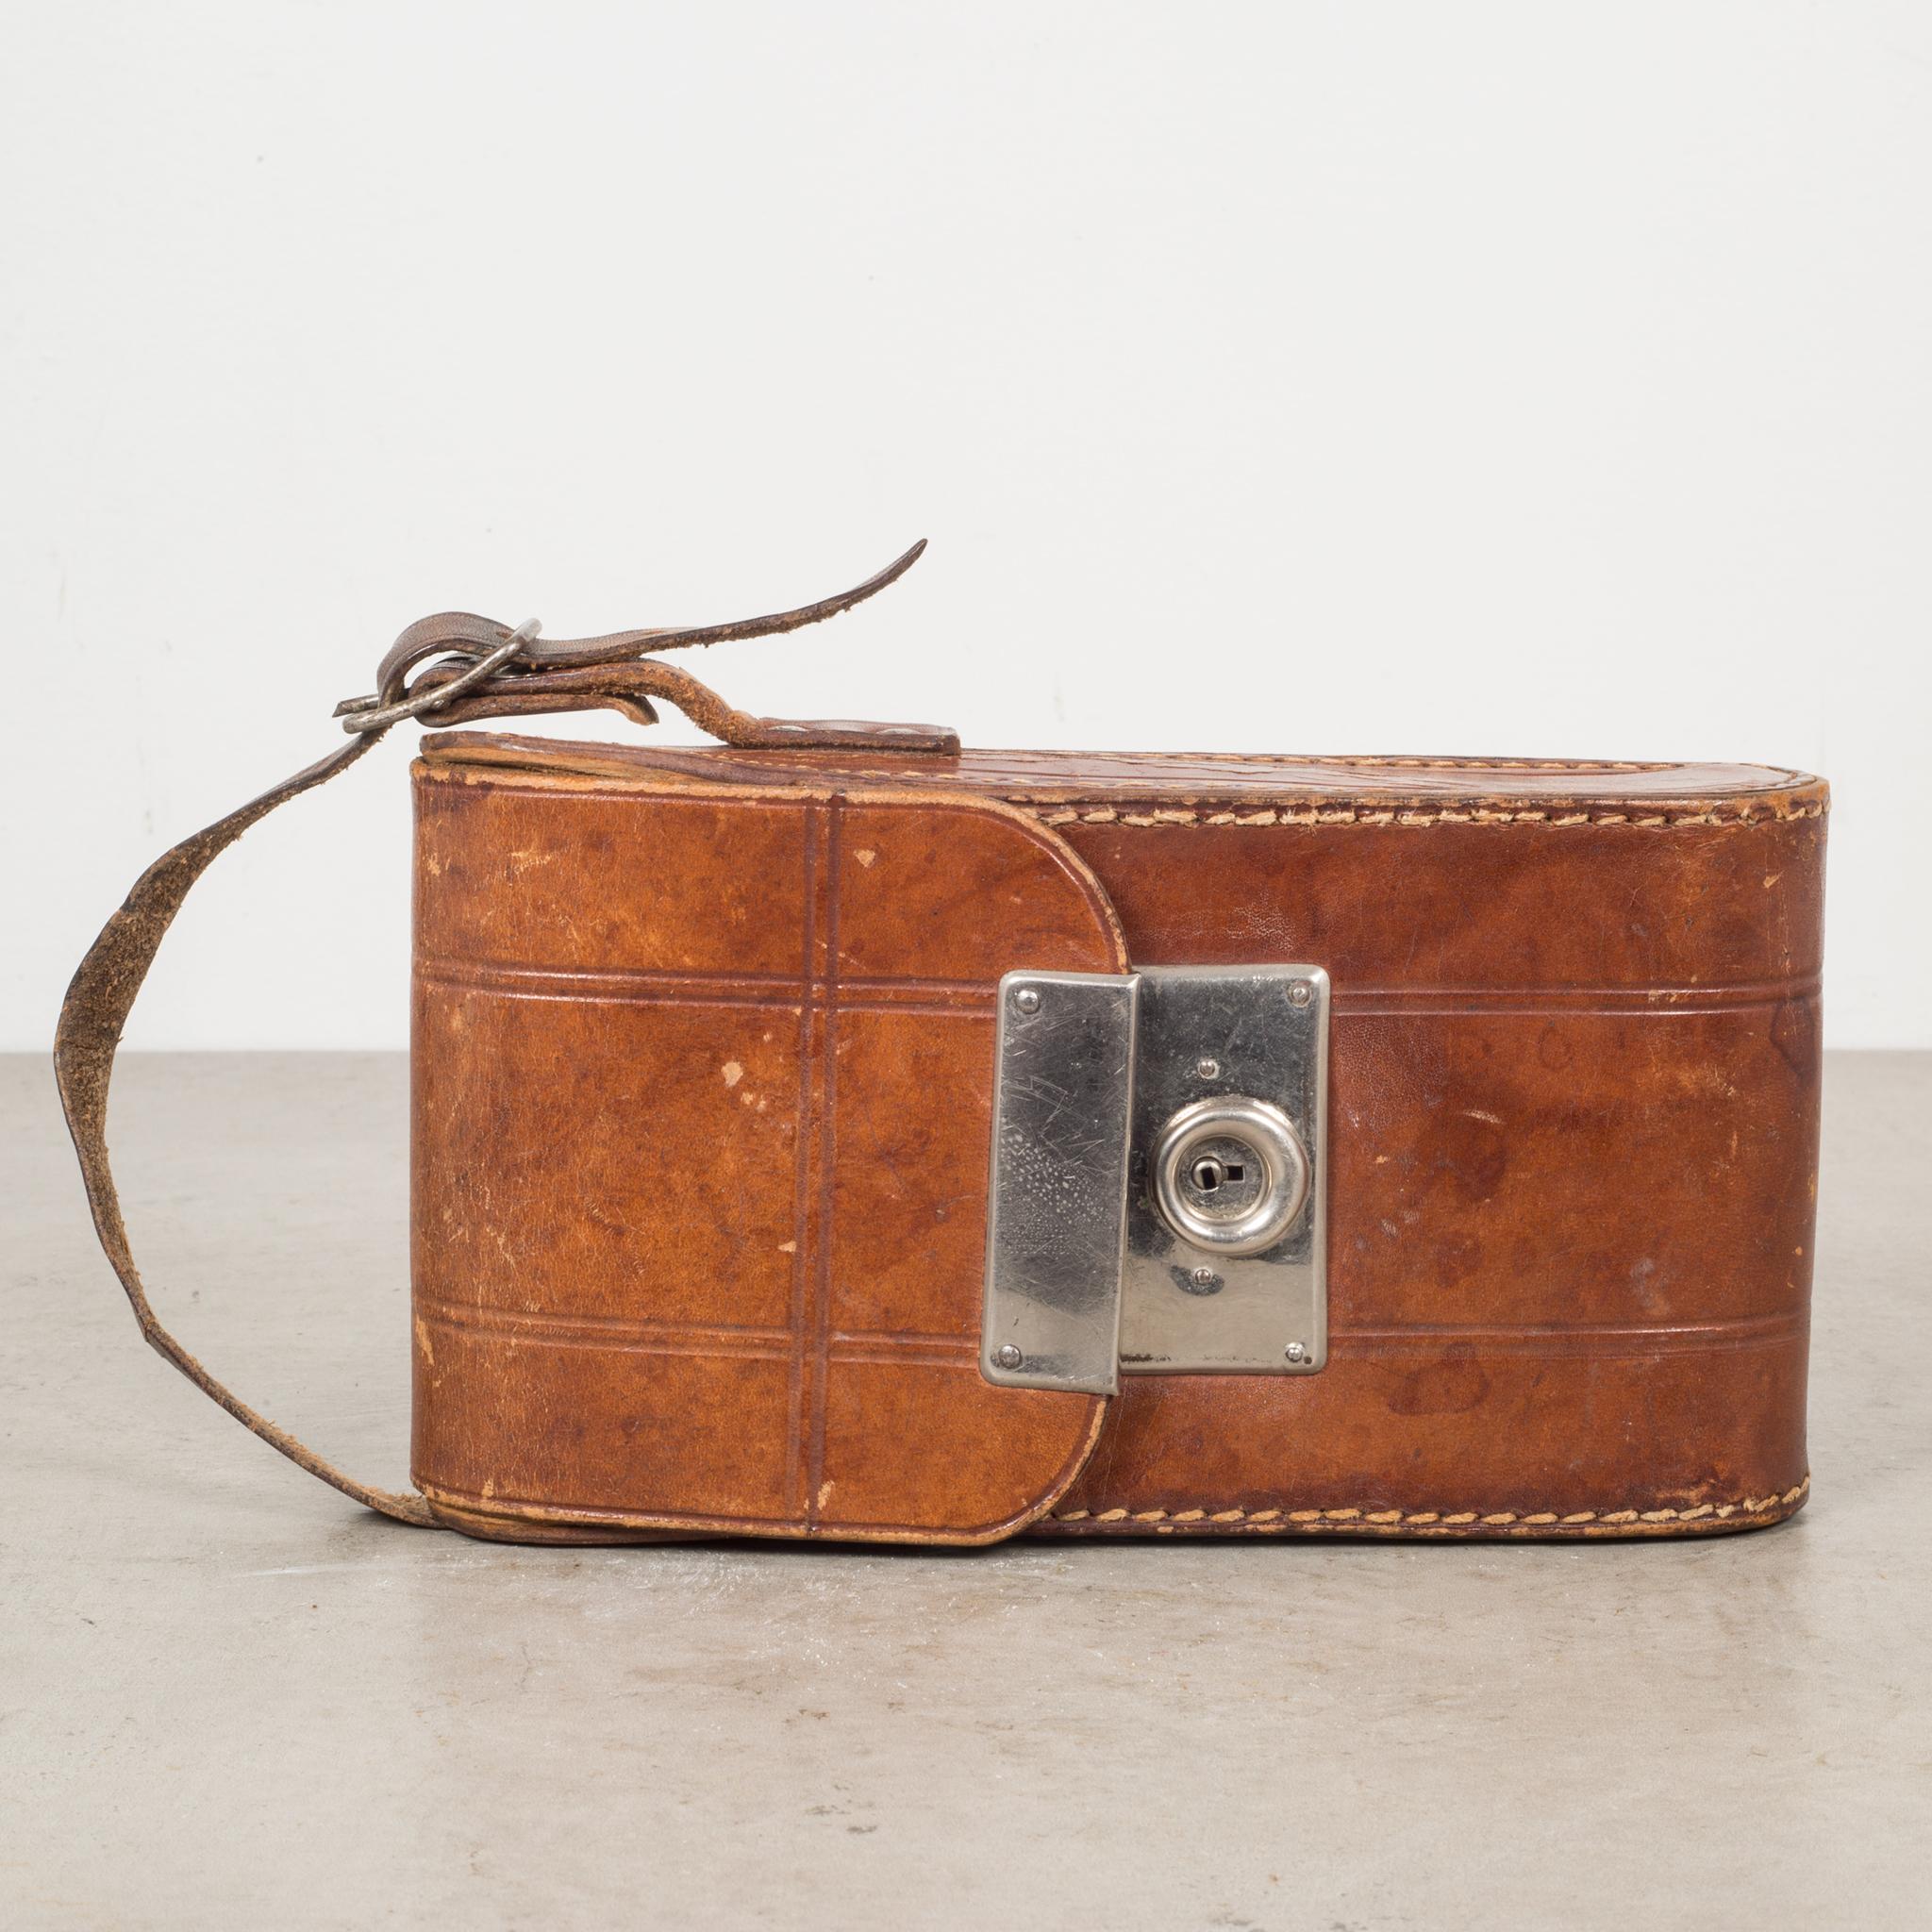 About

An antique no. 2 folding brownie camera and original leather case. It has a rectangular body, and a sliding lens post connected to the body by bellows. It folds smoothly closed to 1.25 inches. This camera has retained its original finish